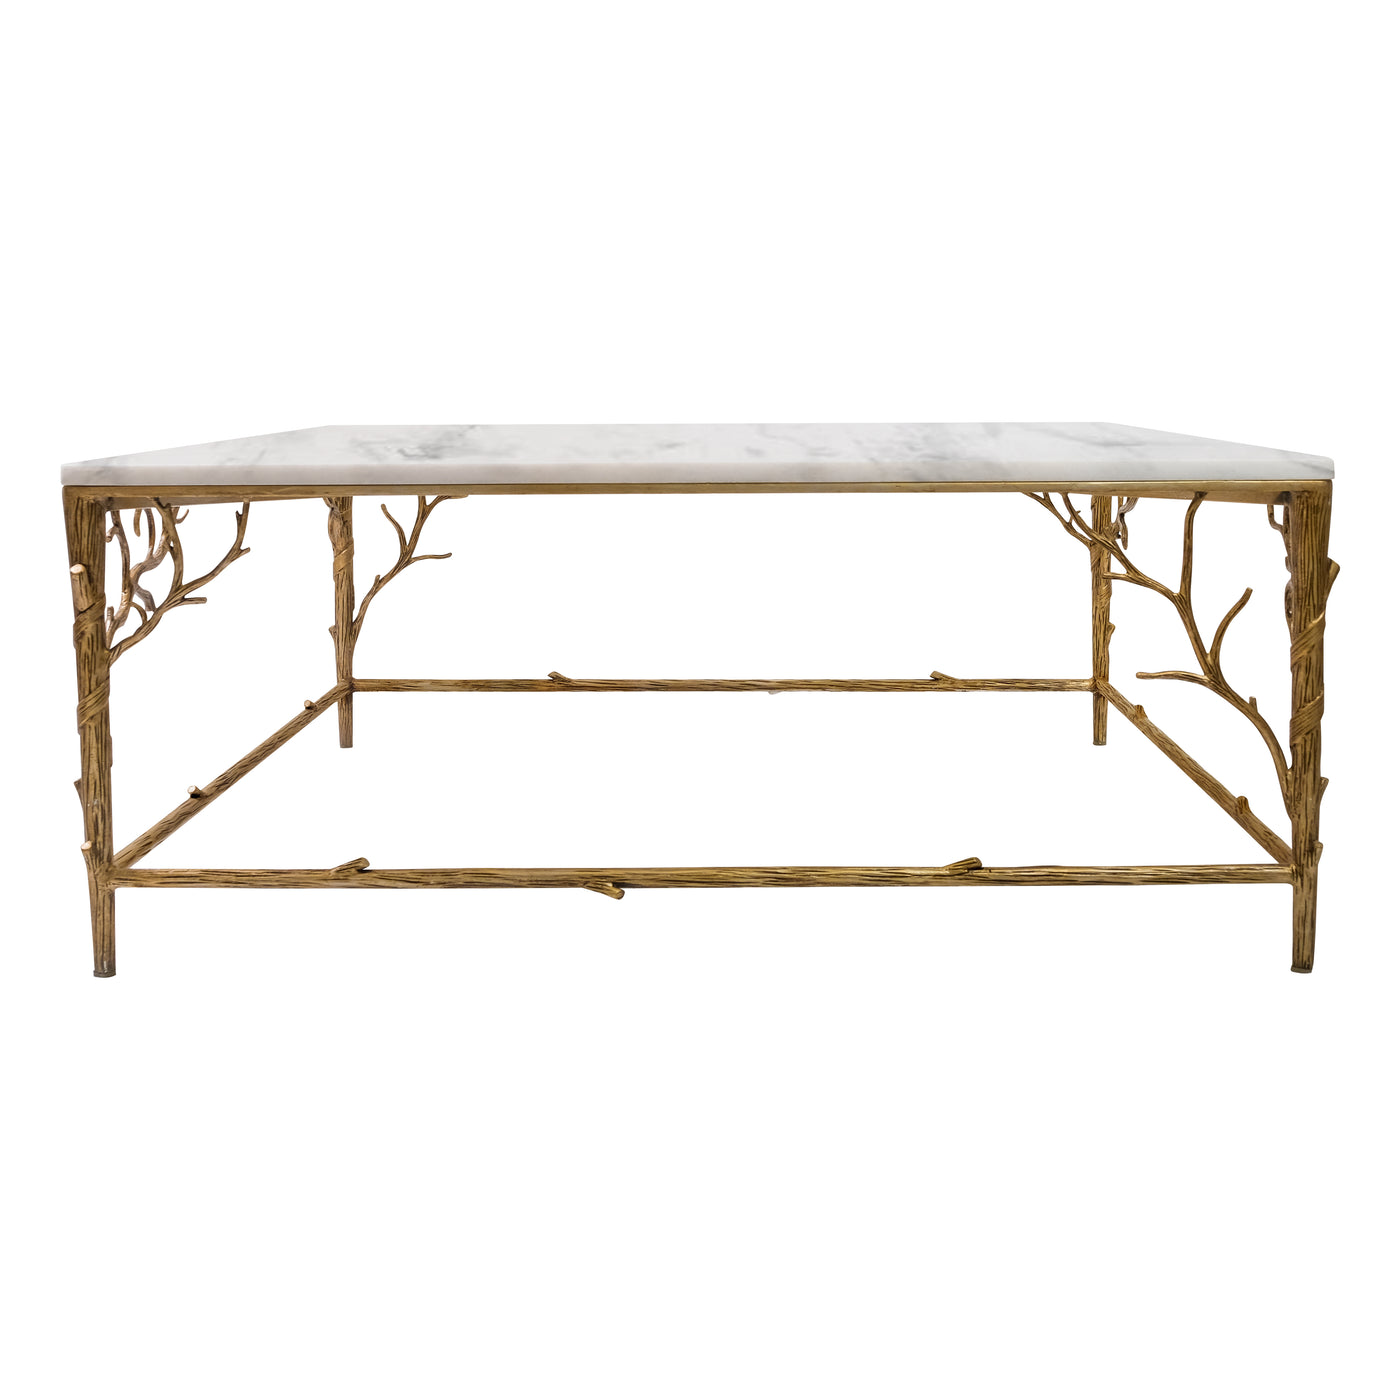 Contemporary square shaped coffee table stands on four legs in the shape of branches painted in an antique champagne color